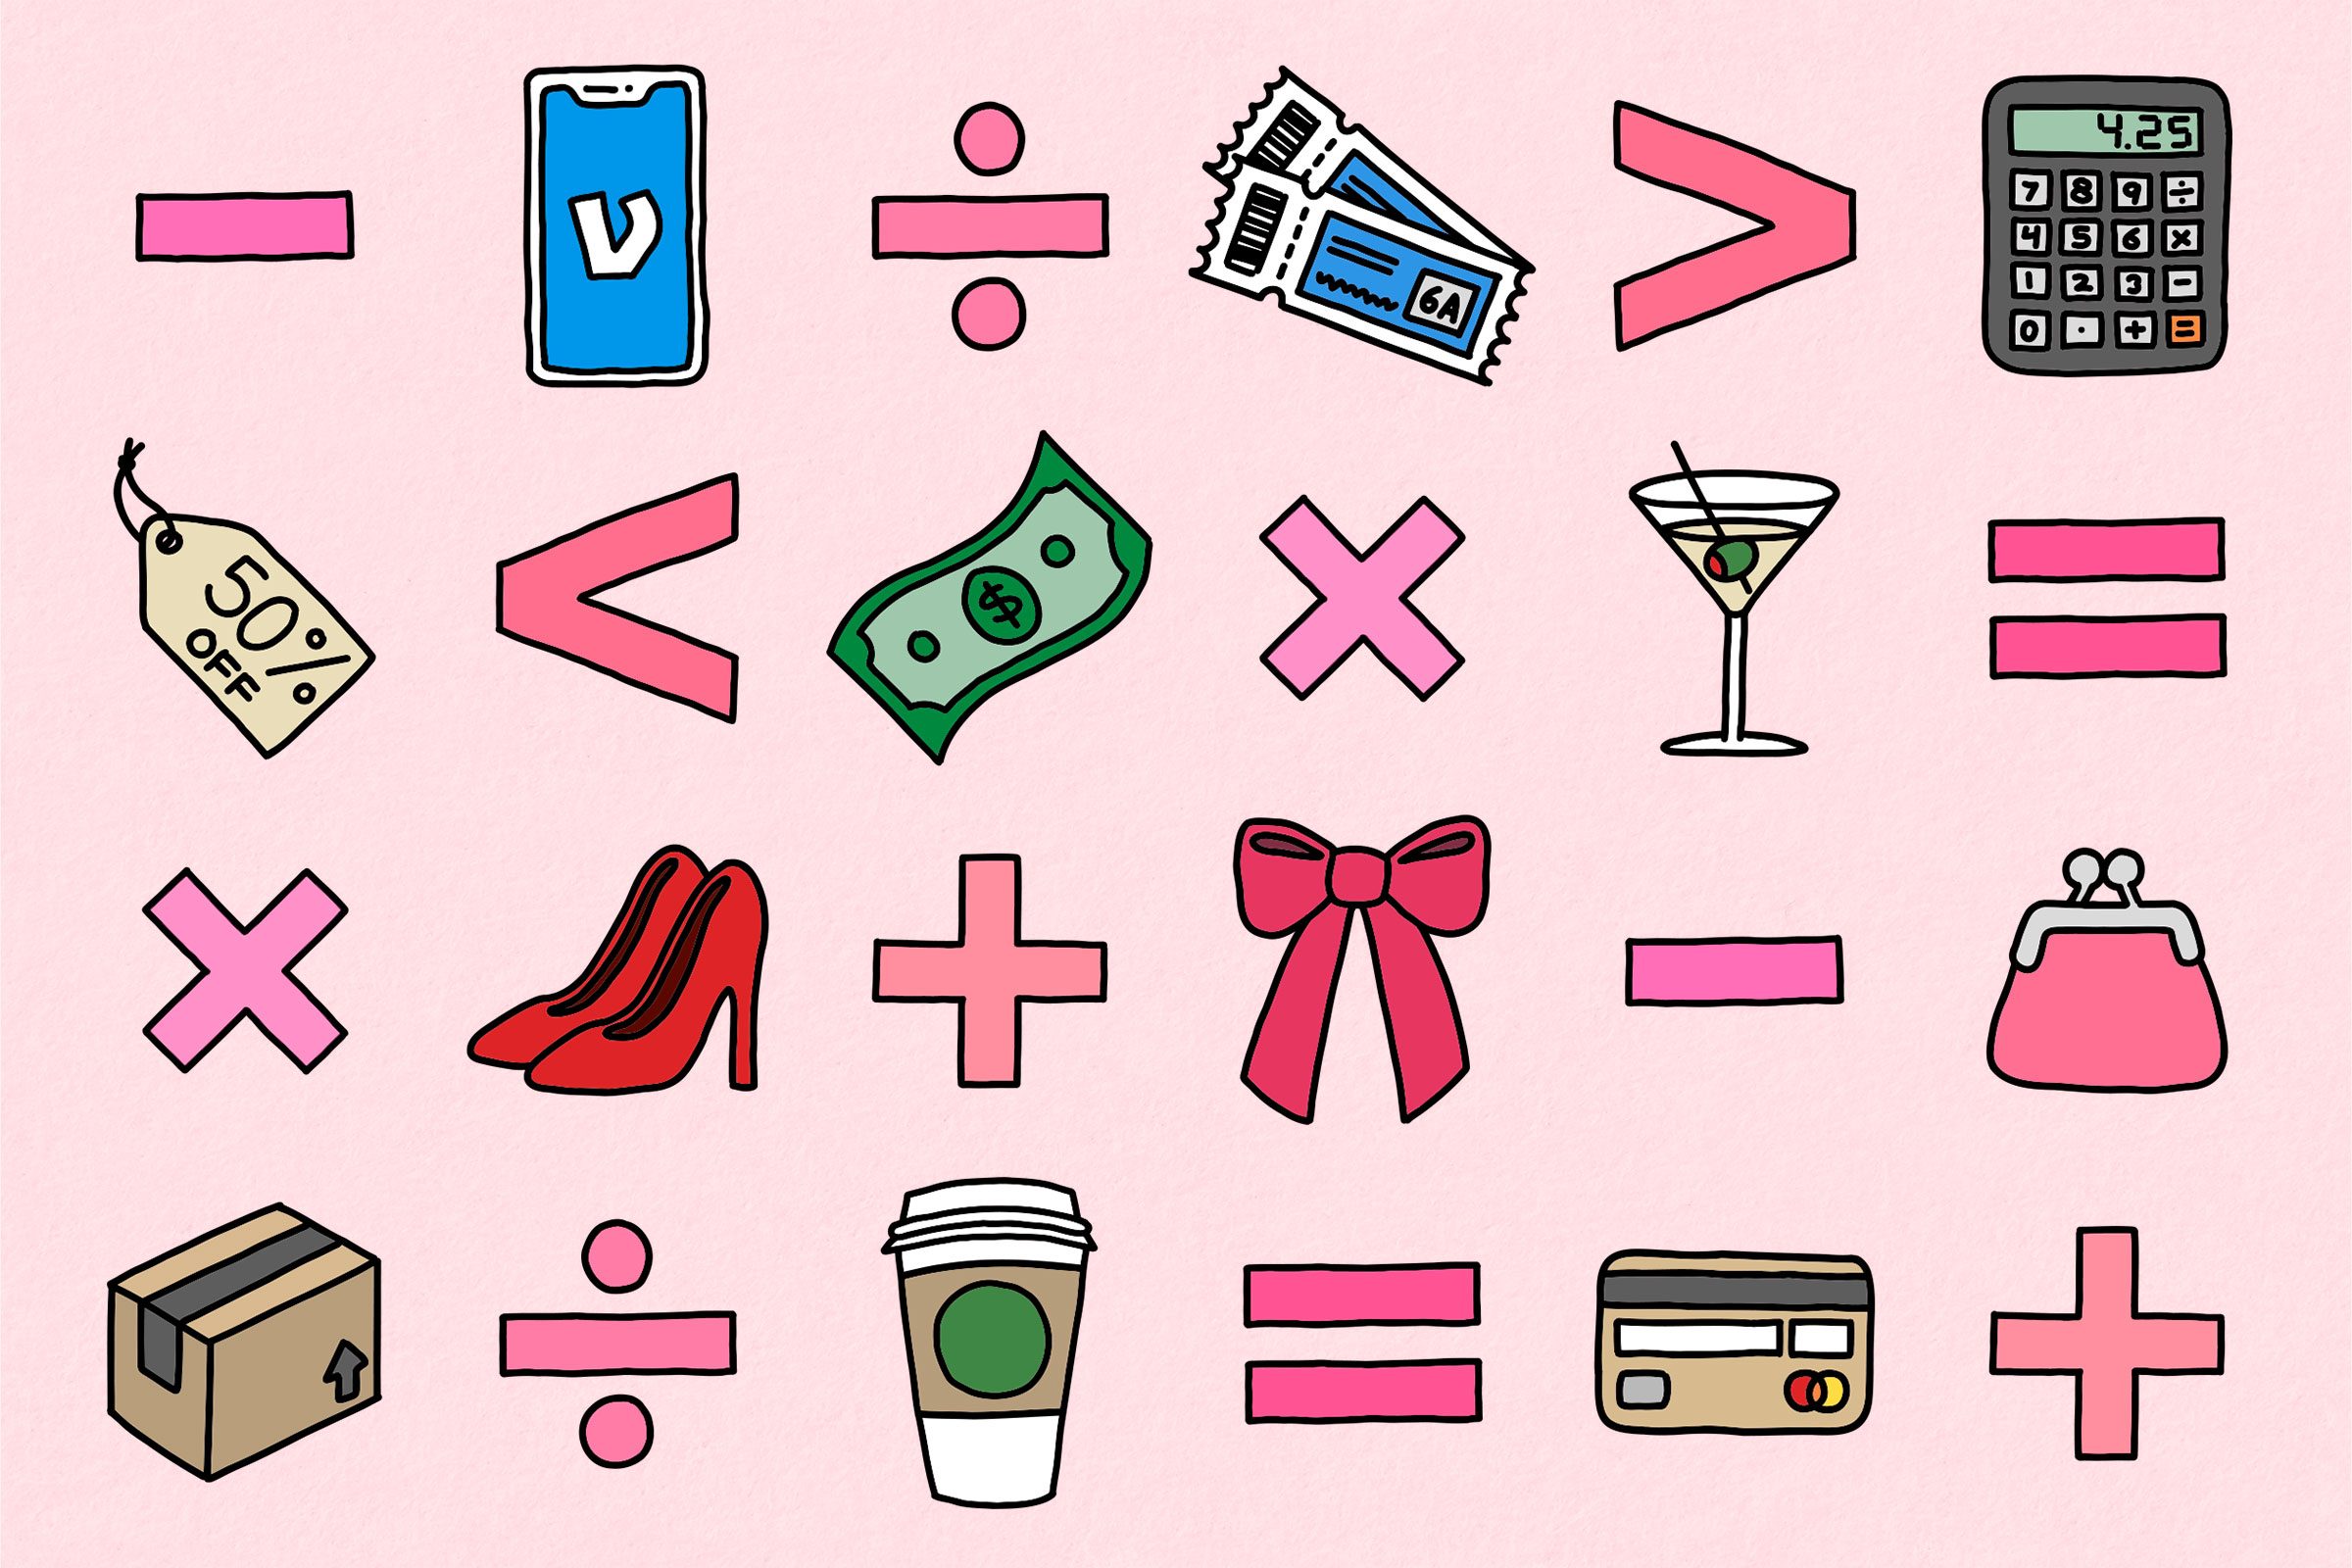 How I Use “Girl Math” to Fuel My Spending and Splurges